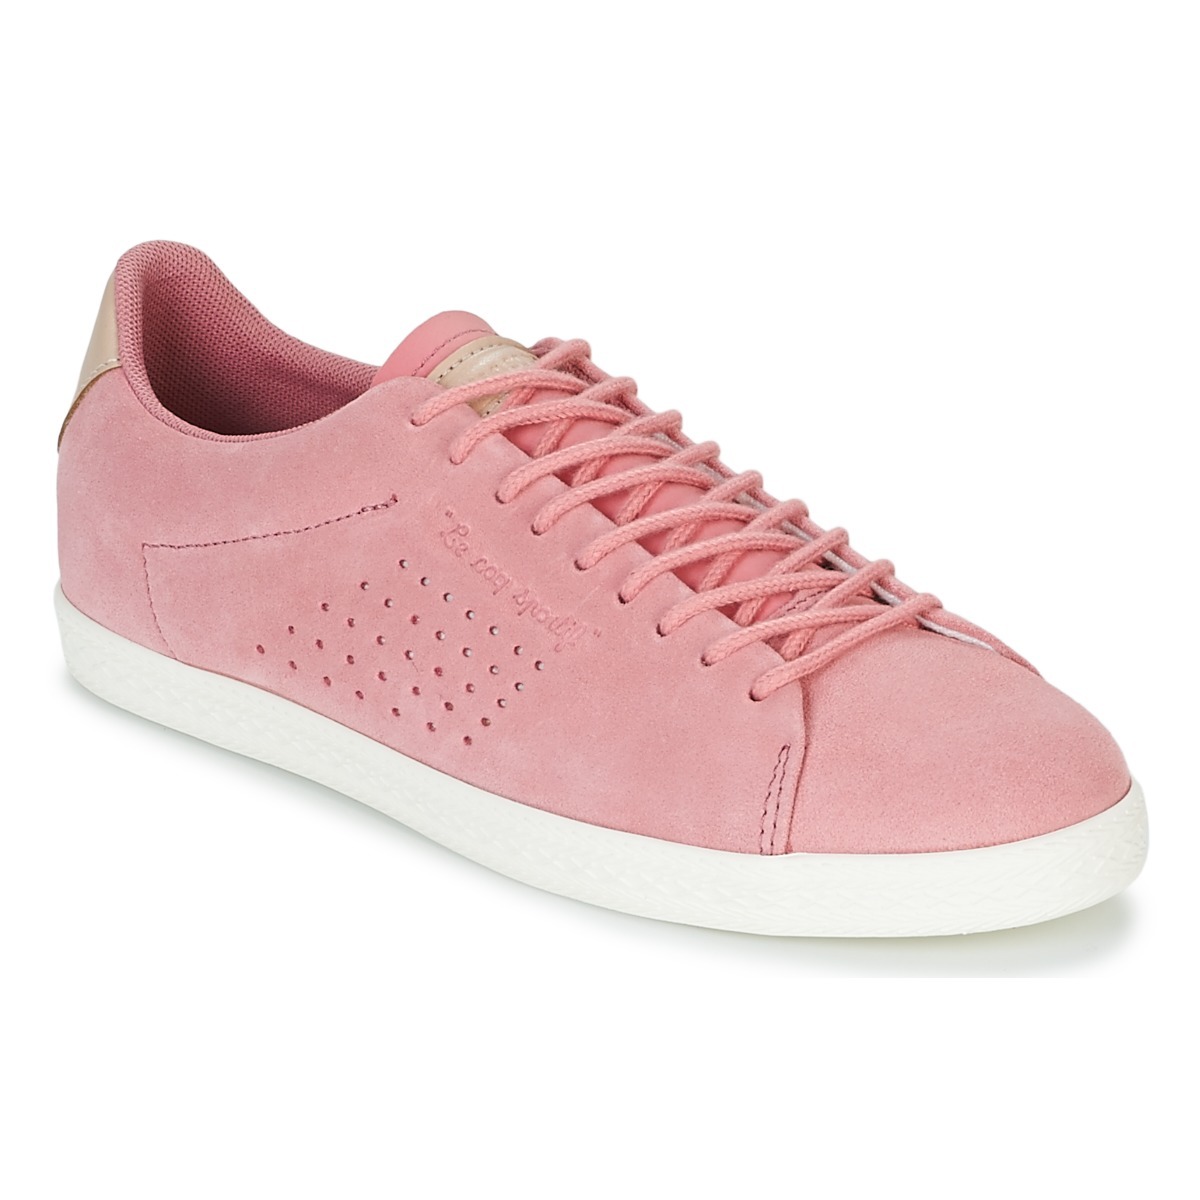 Le Coq Sportif Woman Sneakers Pink at Spartoo GOOFASH